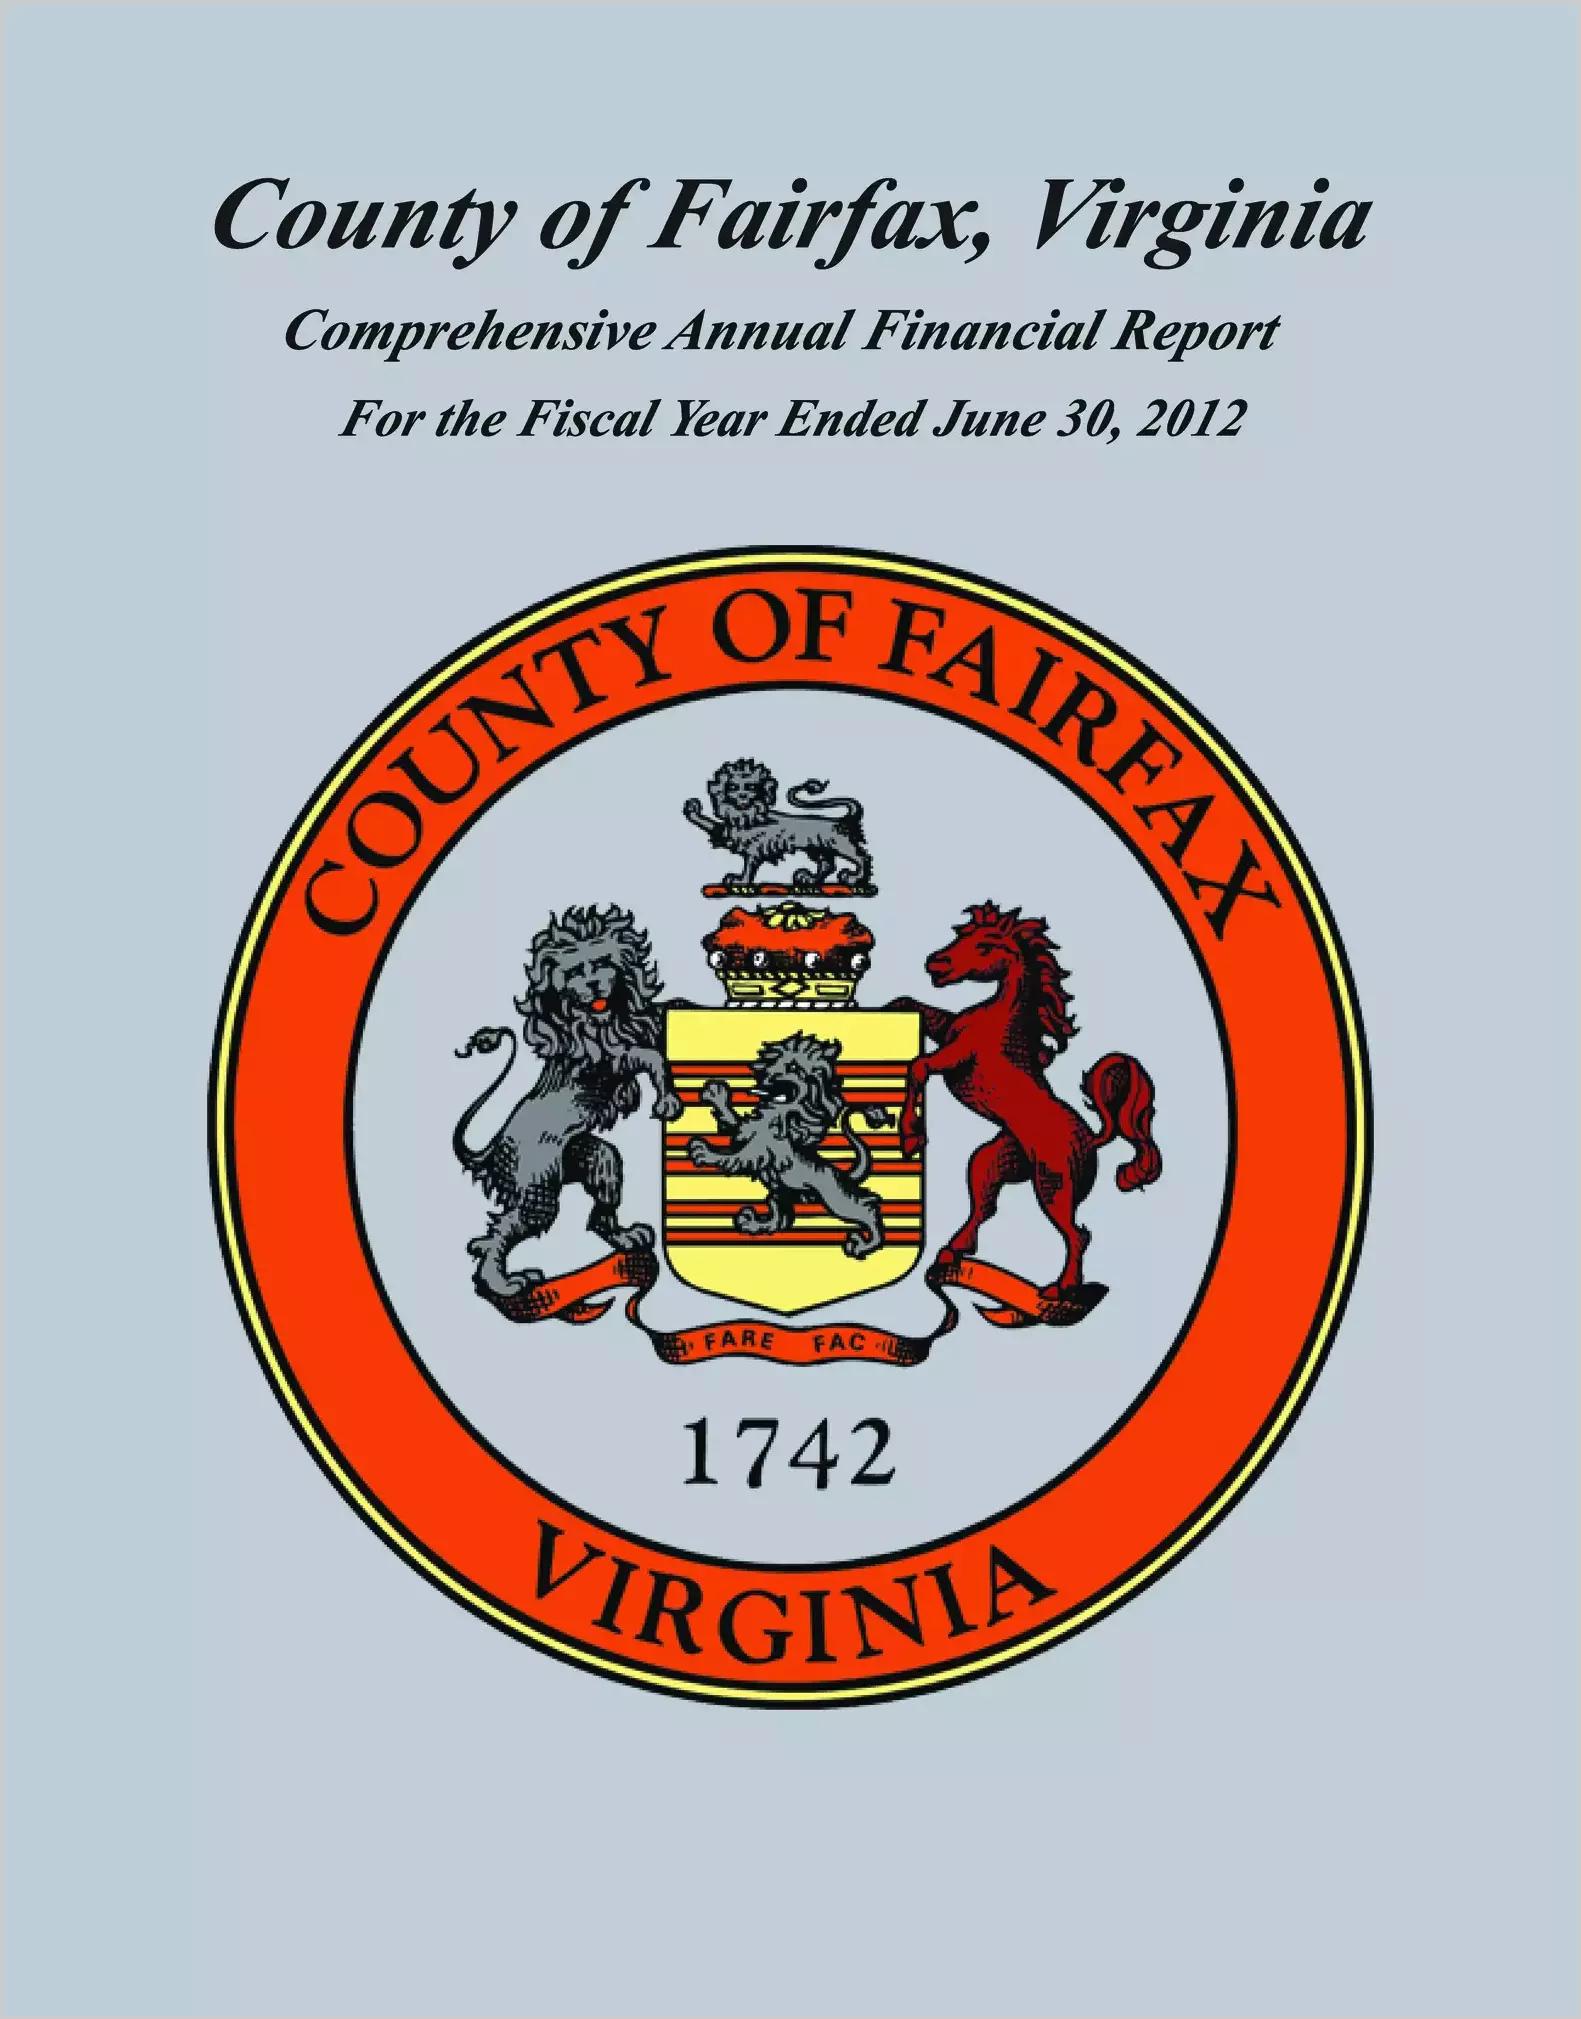 2012 Annual Financial Report for County of Fairfax